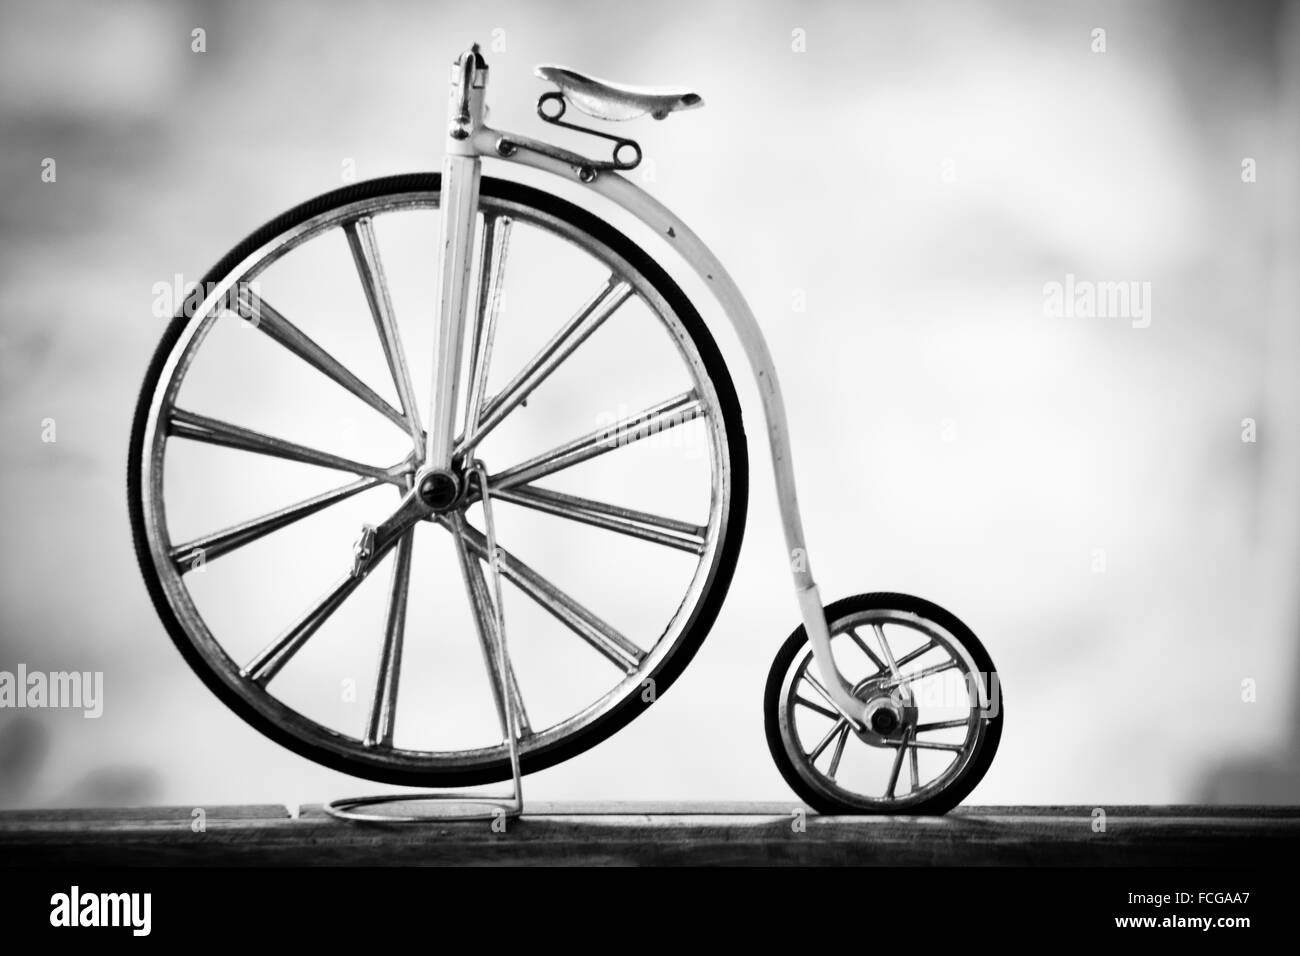 penny farthing ordinary